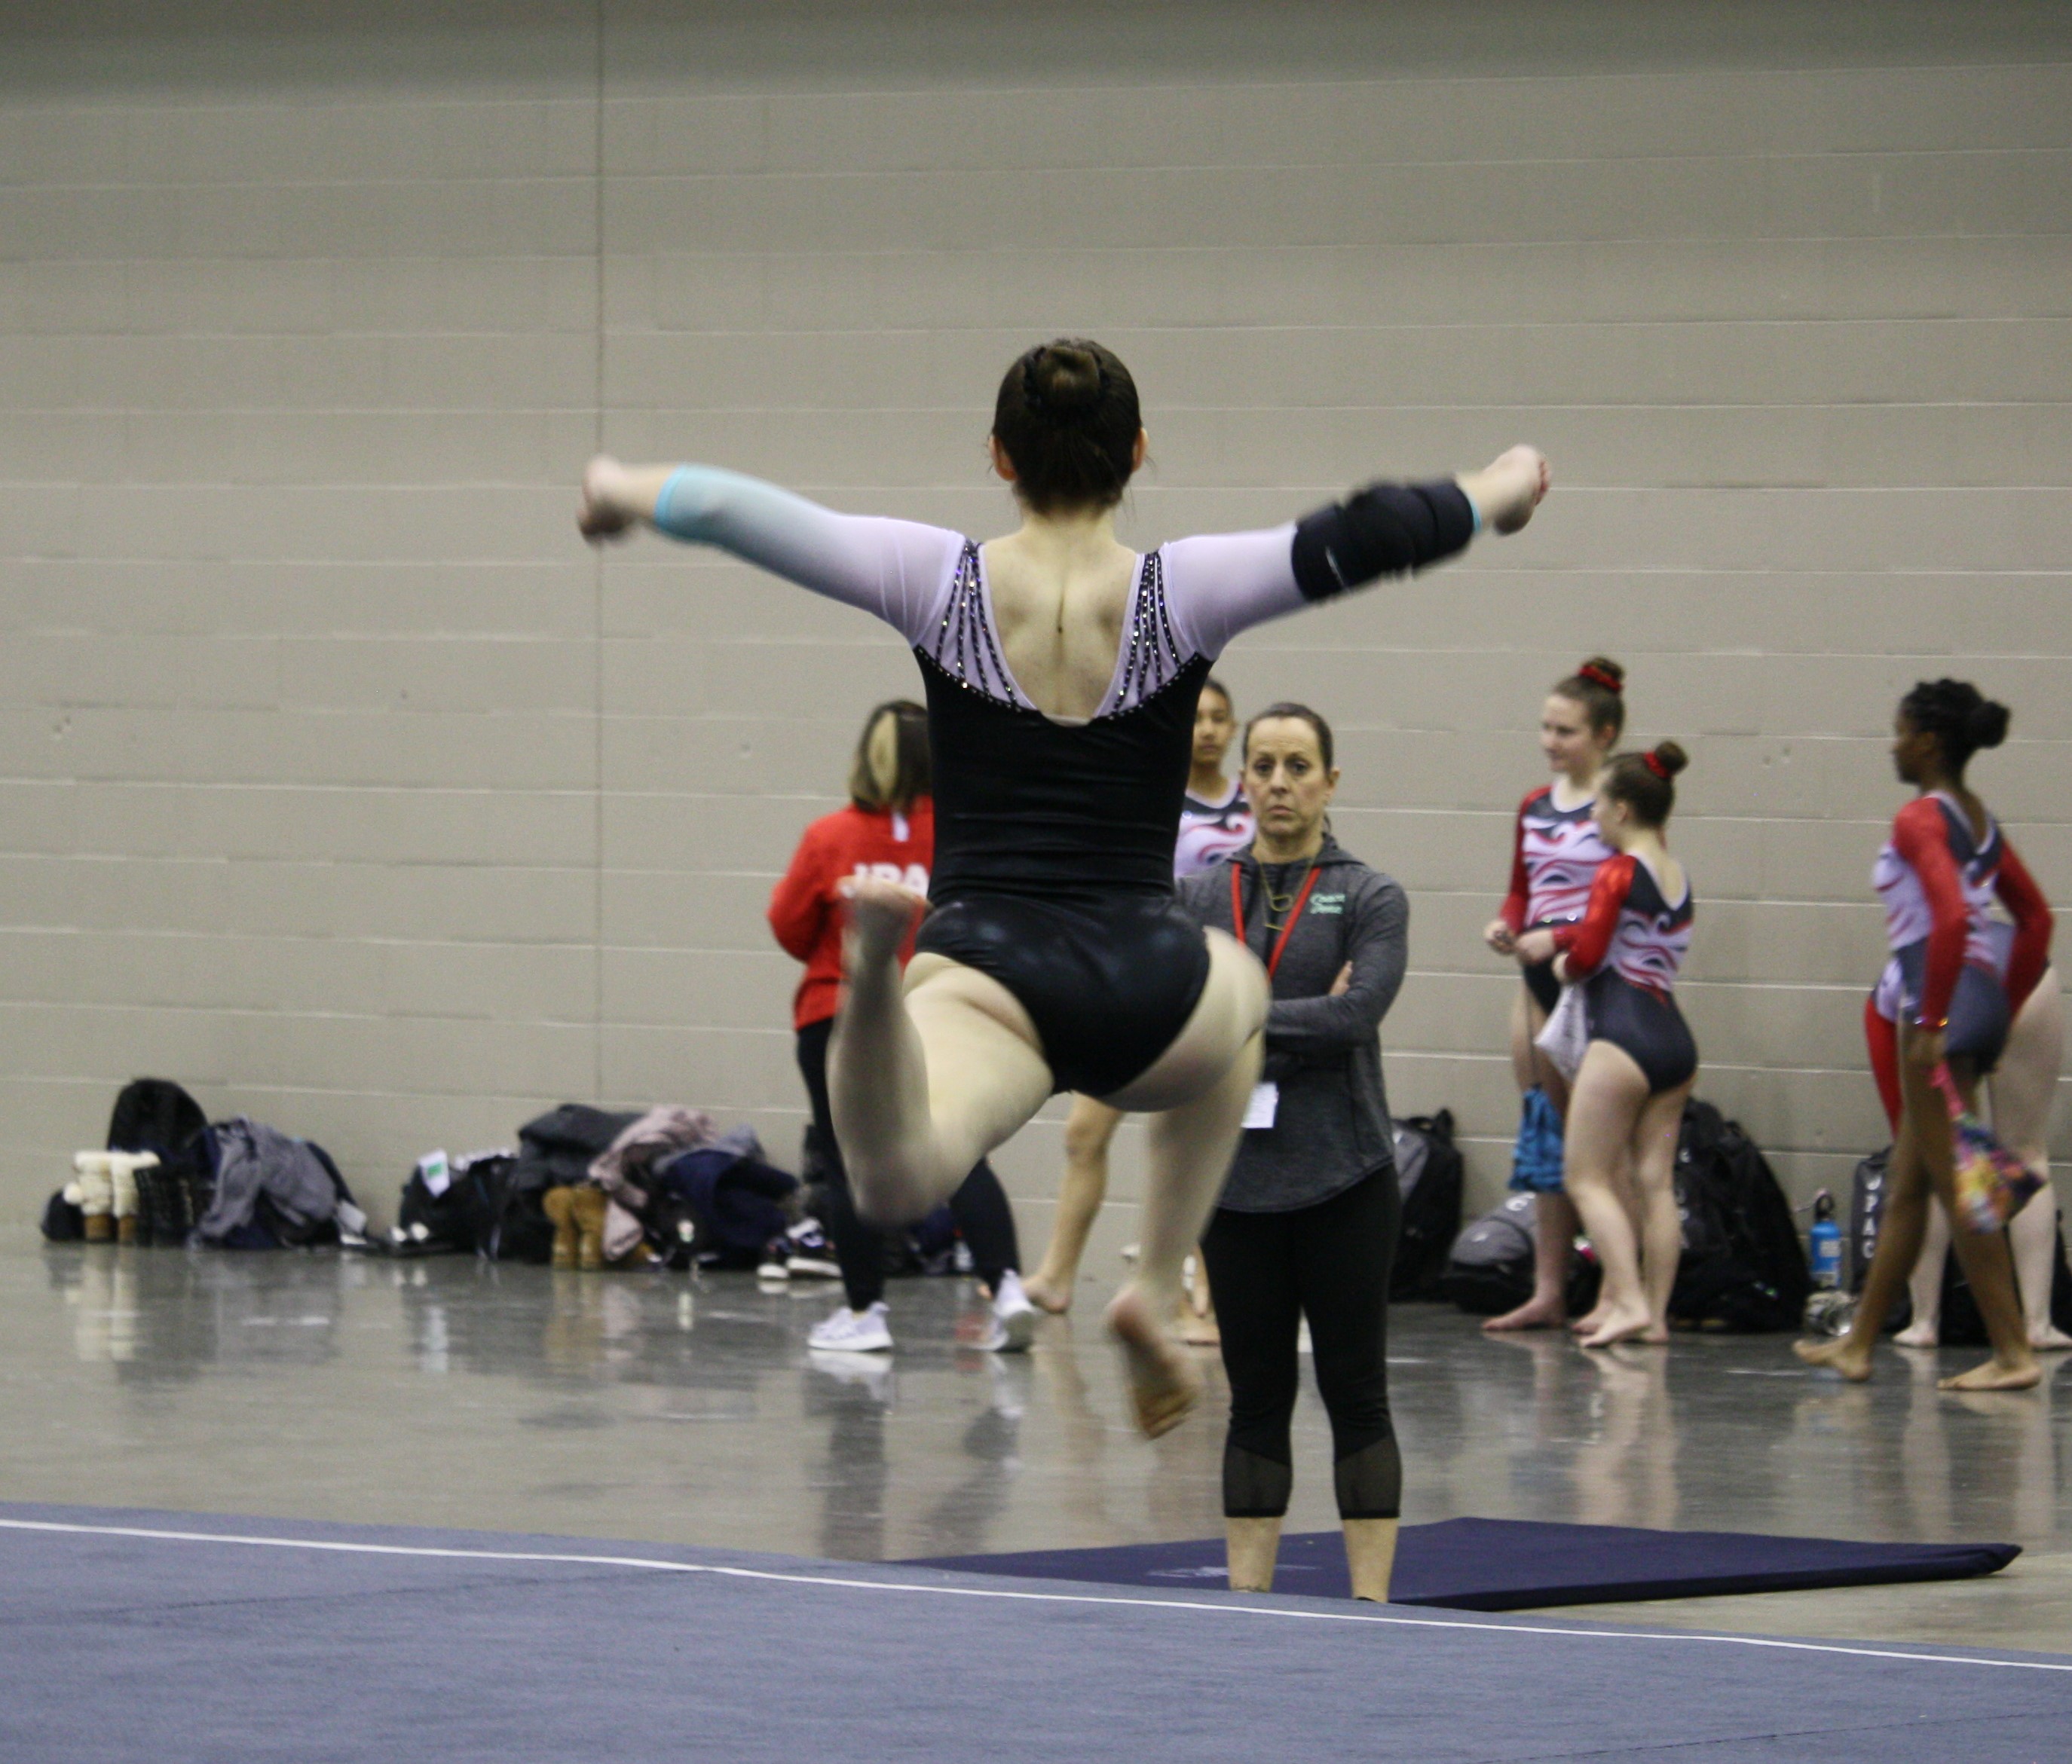 Pictue of female gymnast performing a floor routine